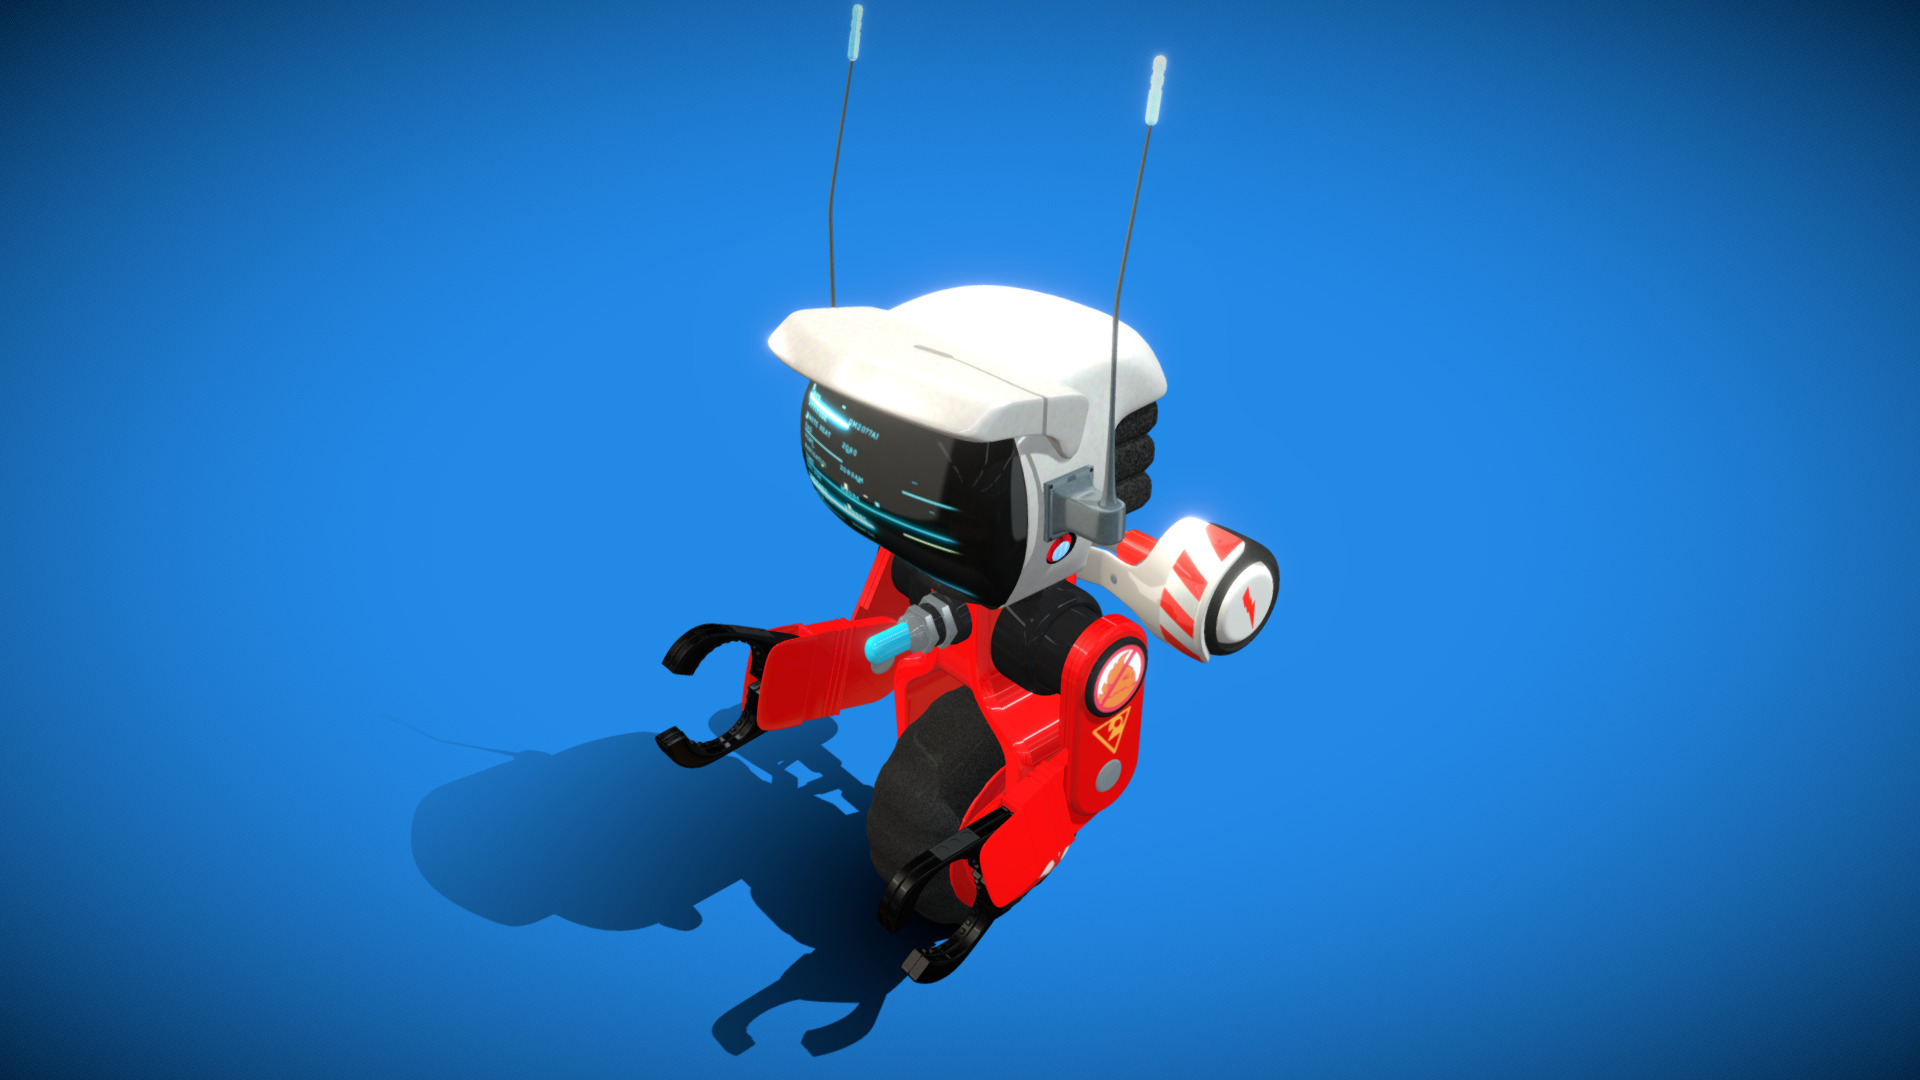 3D model Robo Wheeler 5ZX - This is a 3D model of the Robo Wheeler 5ZX. The 3D model is about a person in a red and white suit with a machine attached to it.